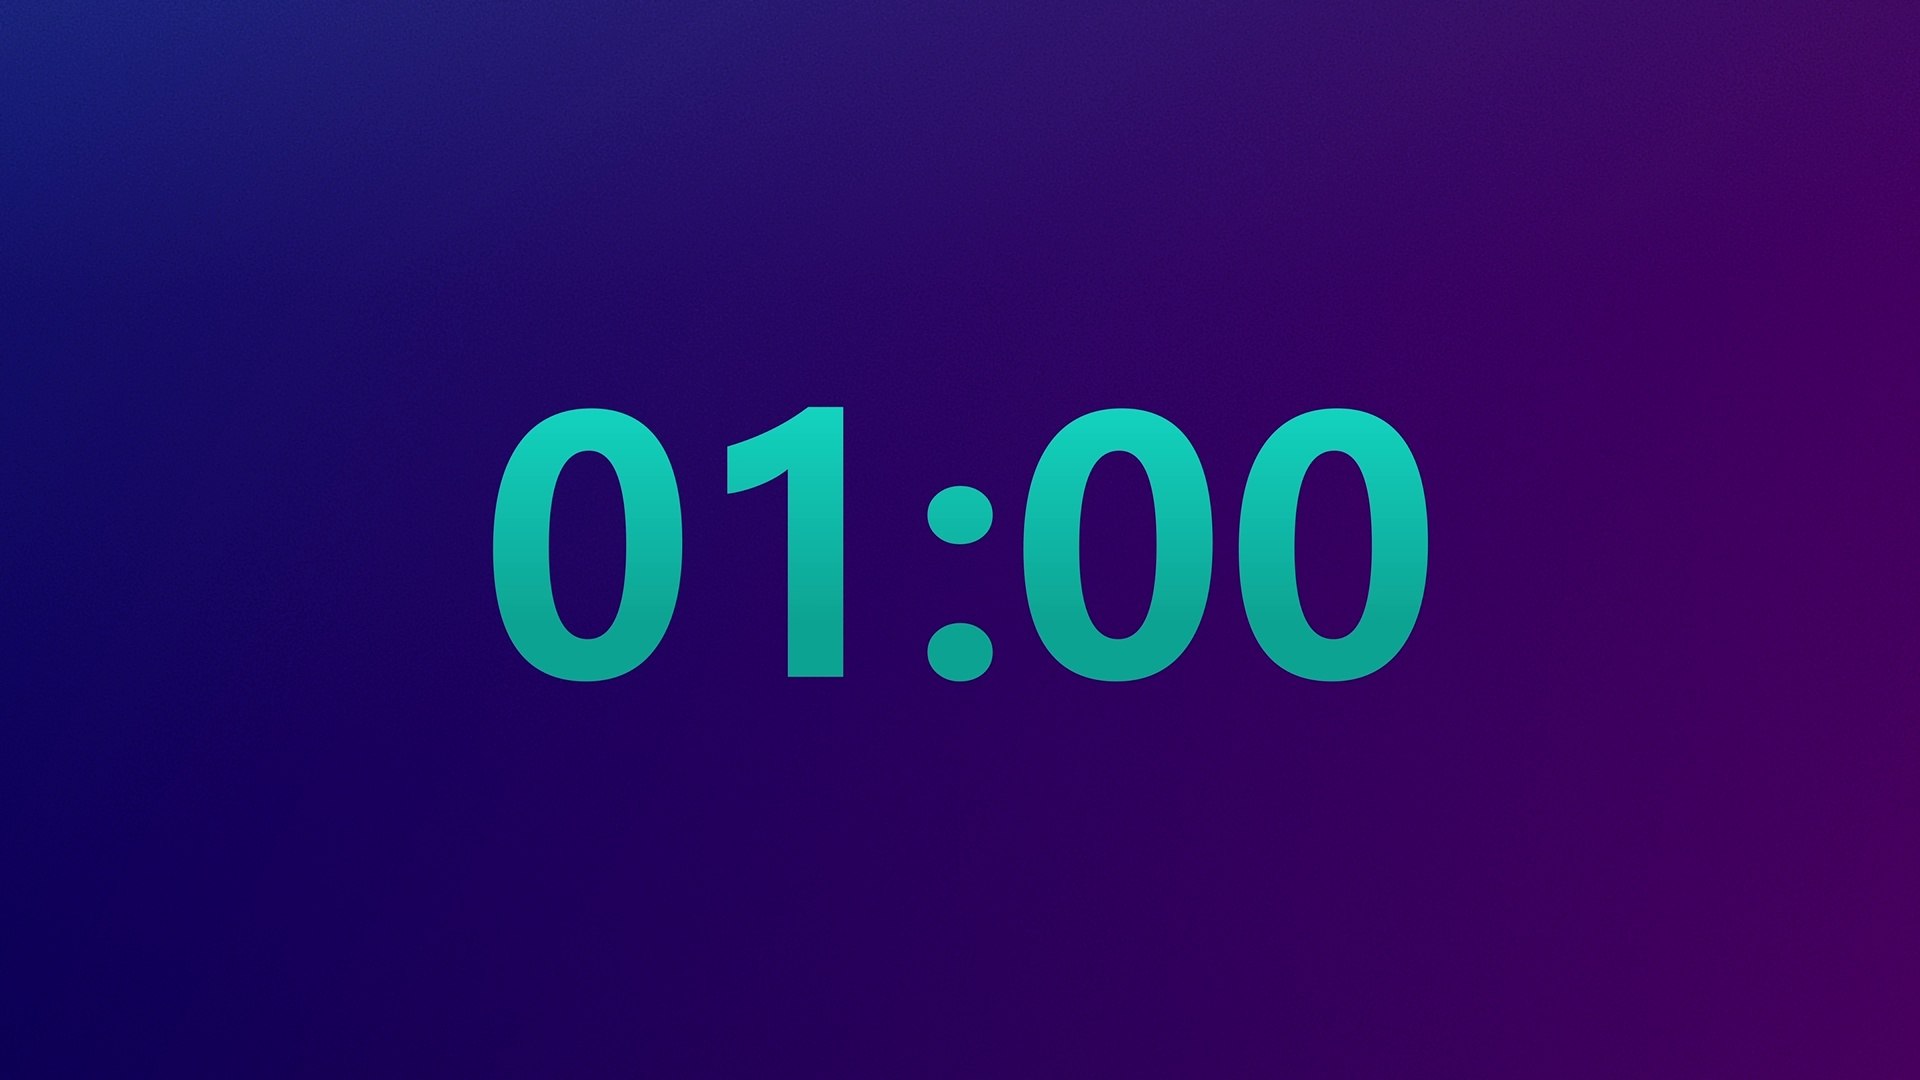 1 Minute Timer Countdown with Sound Alarm ⏱ - Dailymotion